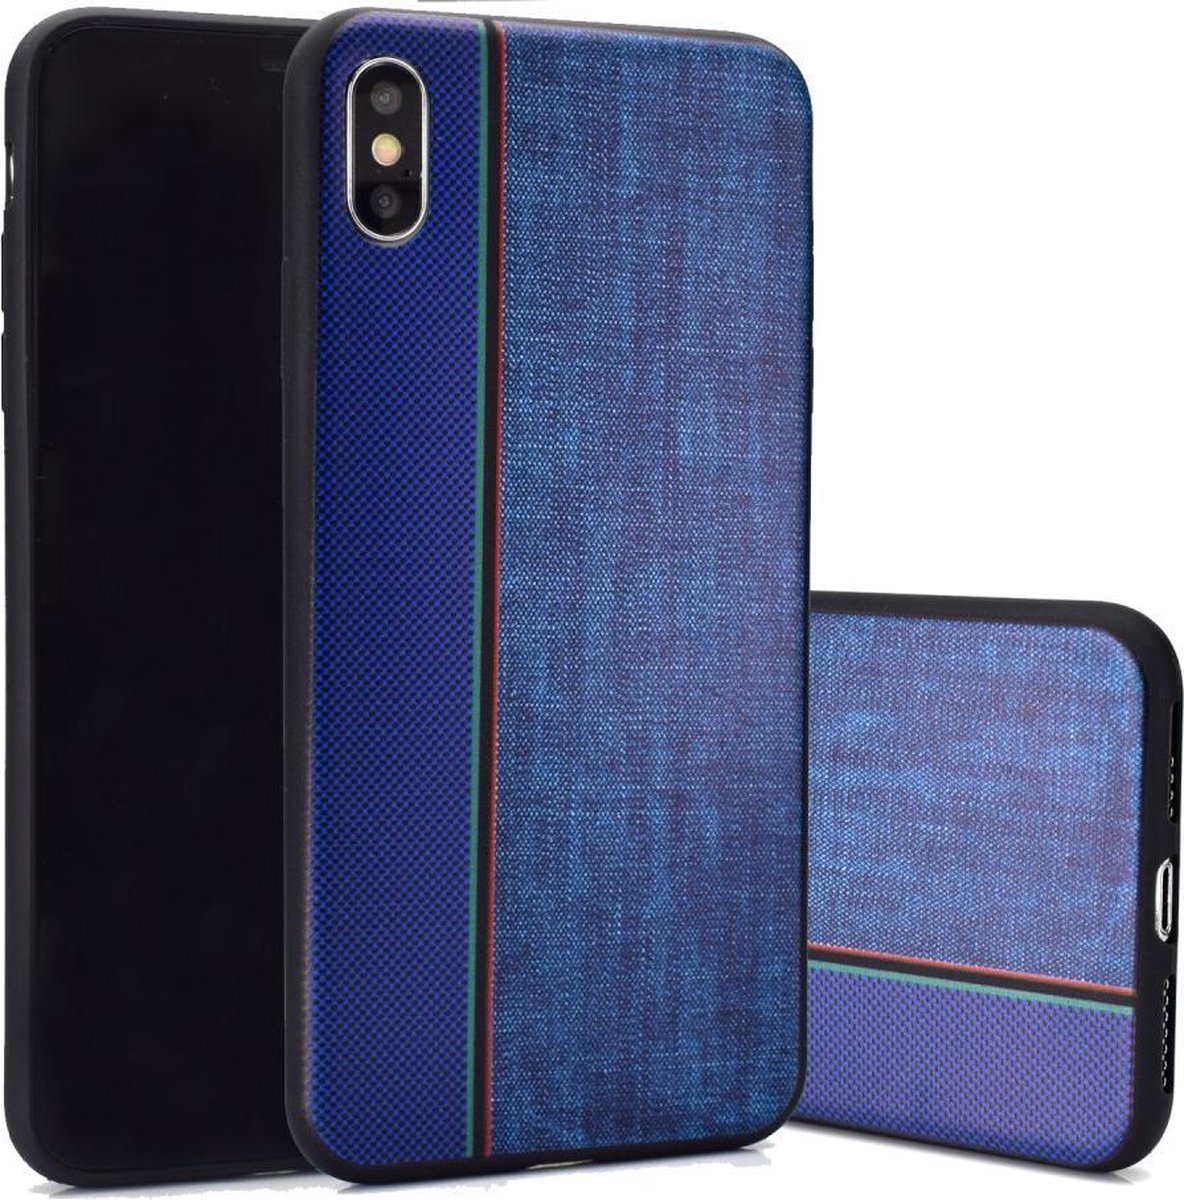 Jeans Softcase - Iphone XS Max Hoesje - Blauw